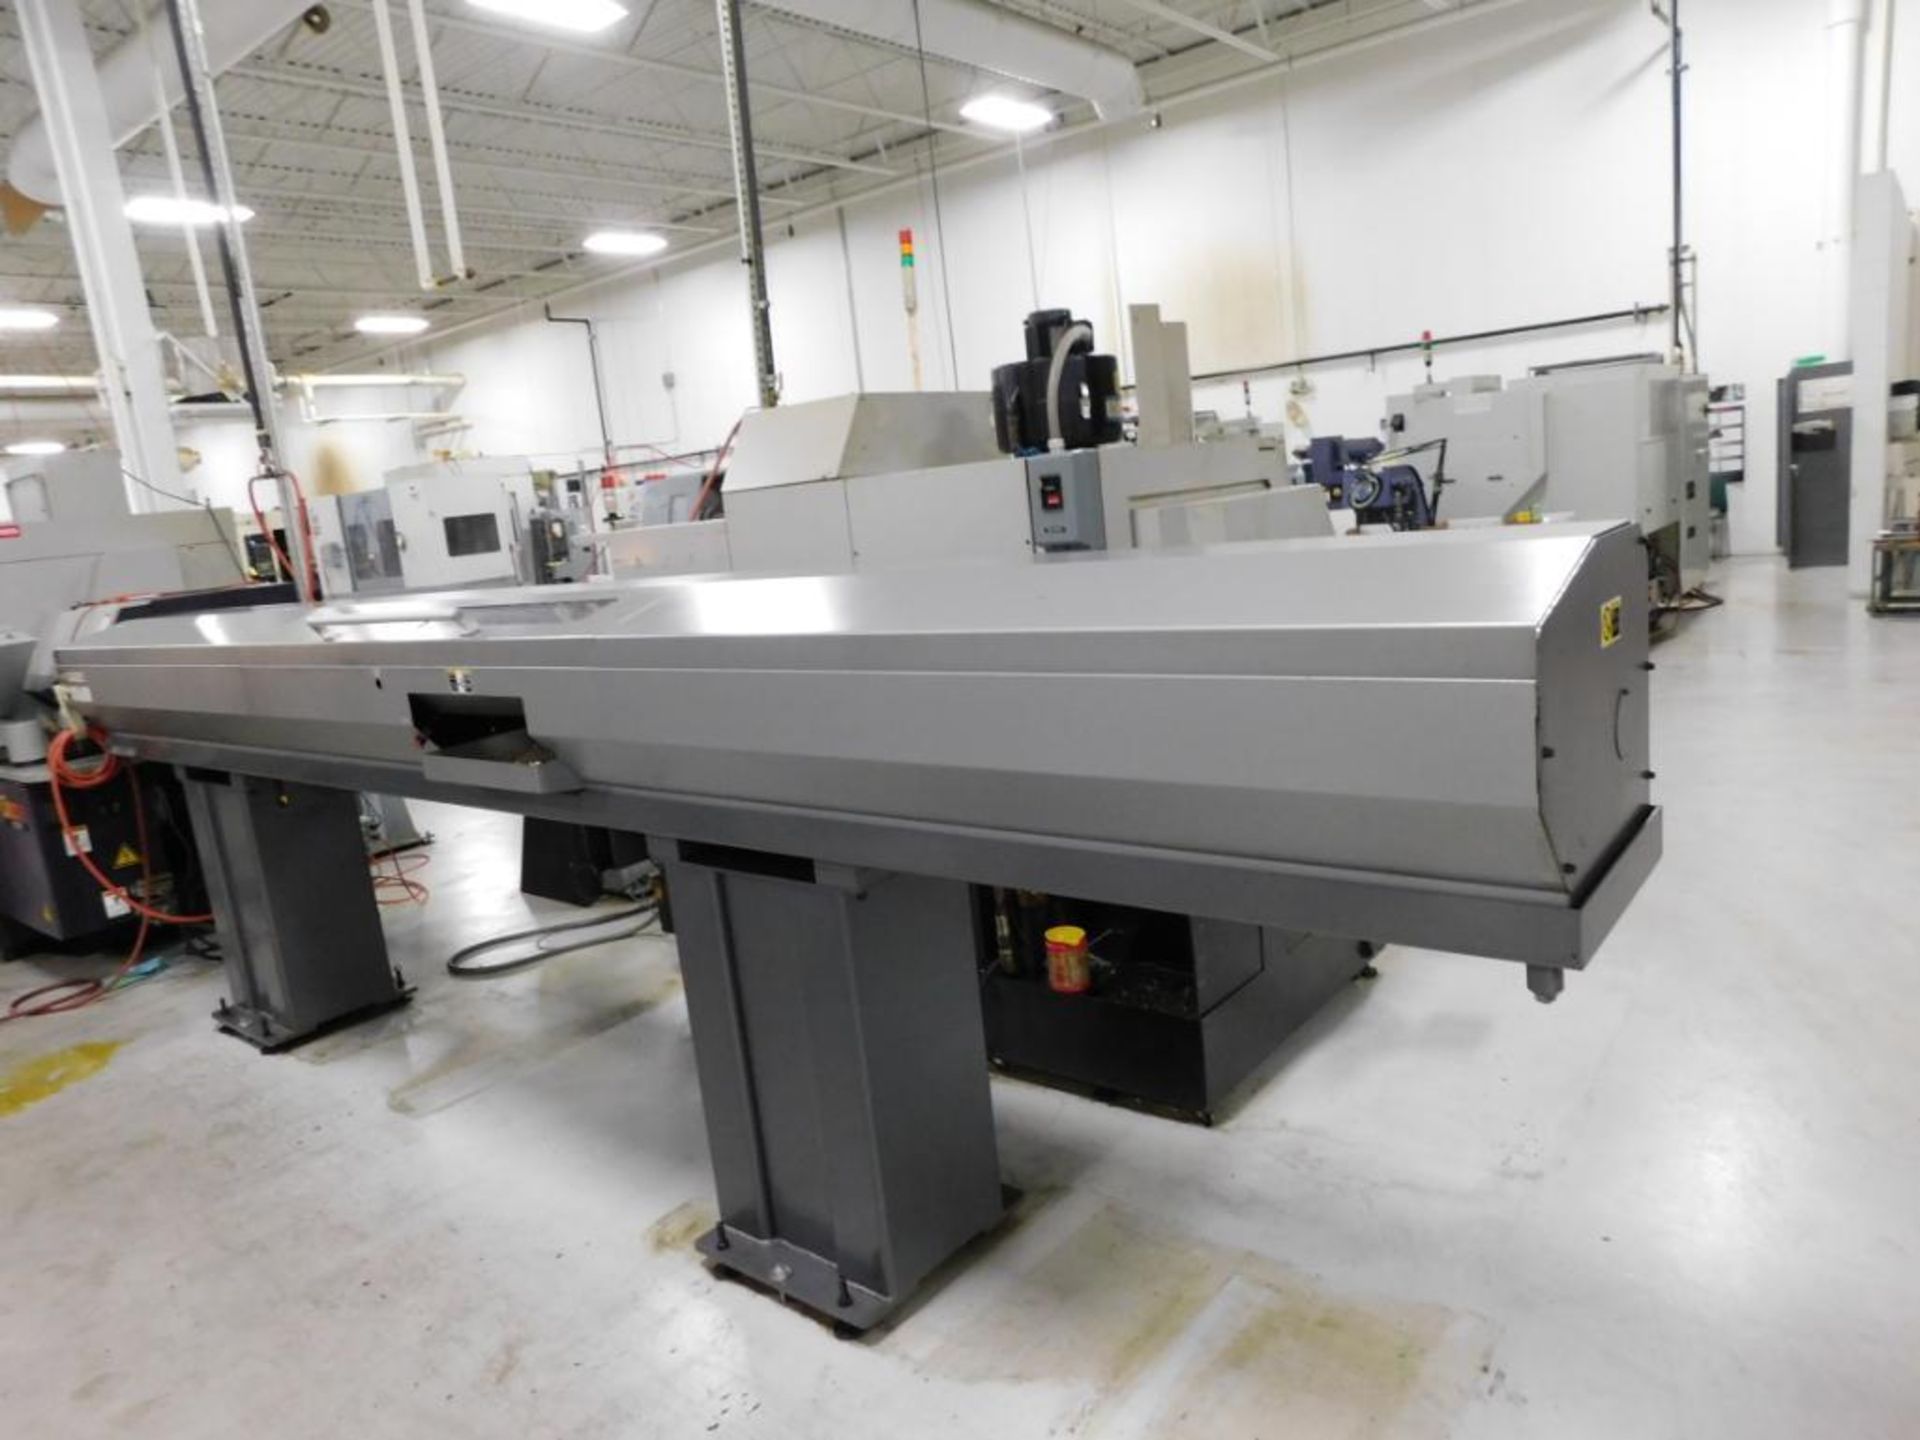 Citizen CNC Swiss Style Turning Center, Model Cincom C32 Type VIII, S/N E324-X12013 (2004), w/Citize - Image 3 of 8